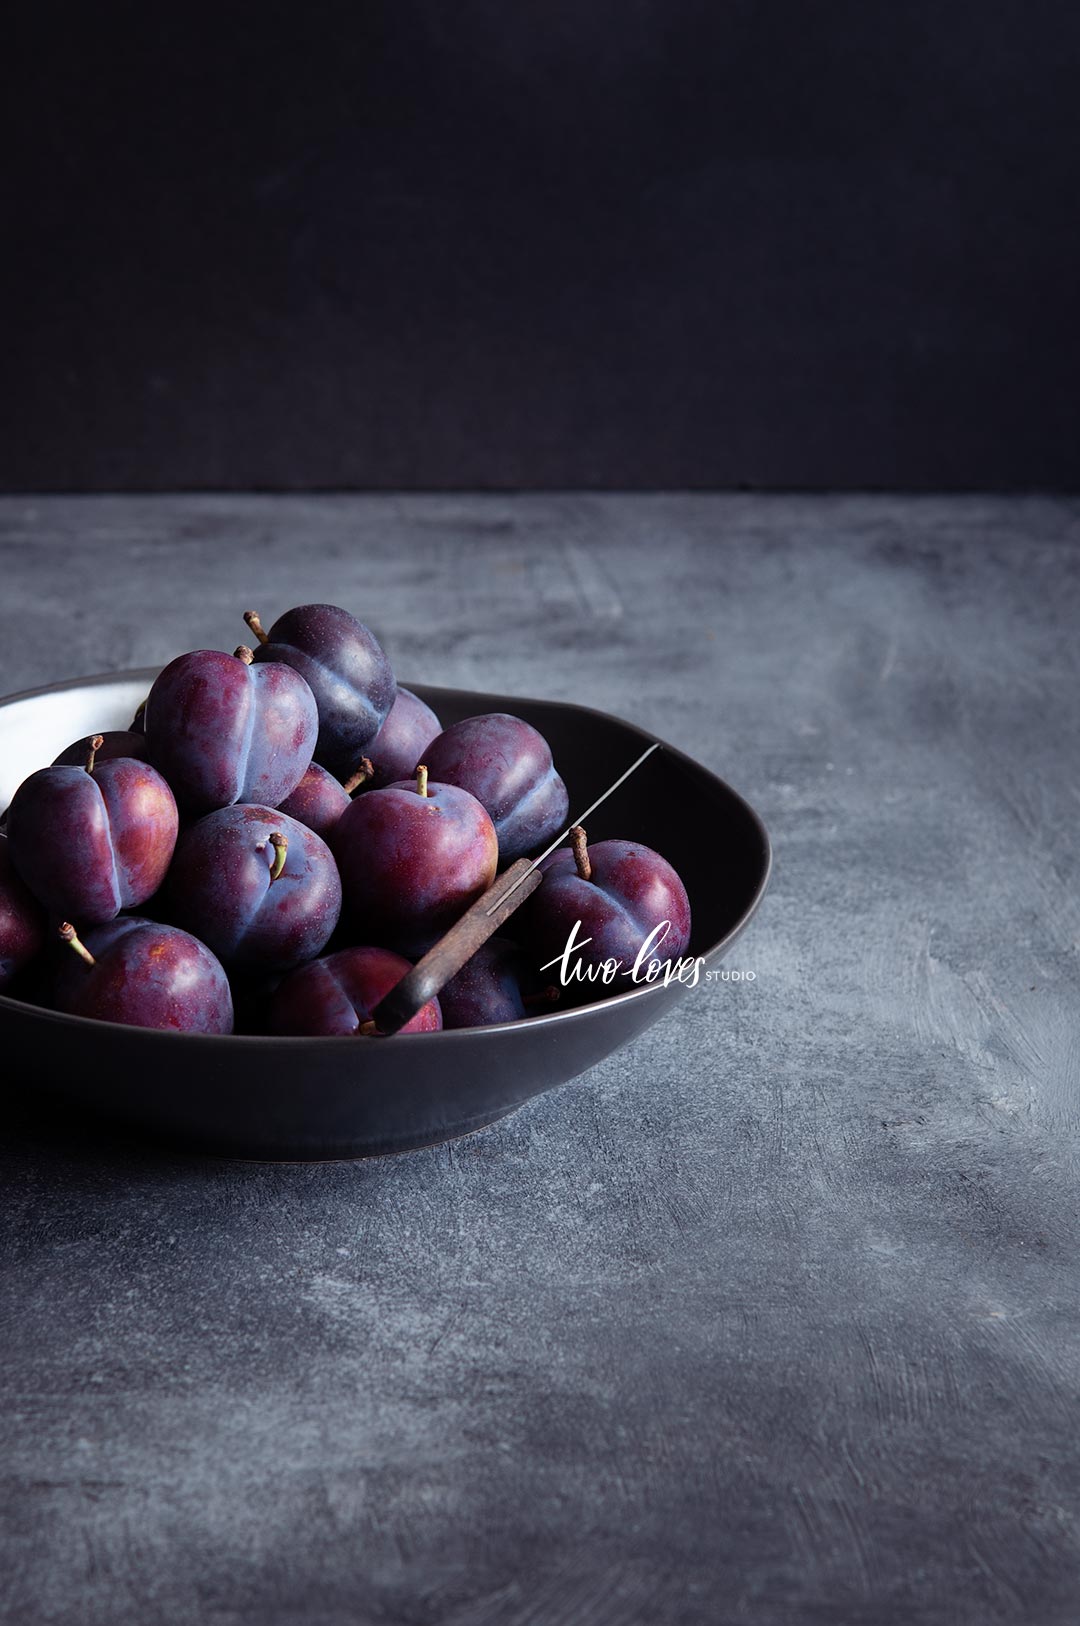 A bowl of plums in a dark lighting setup.